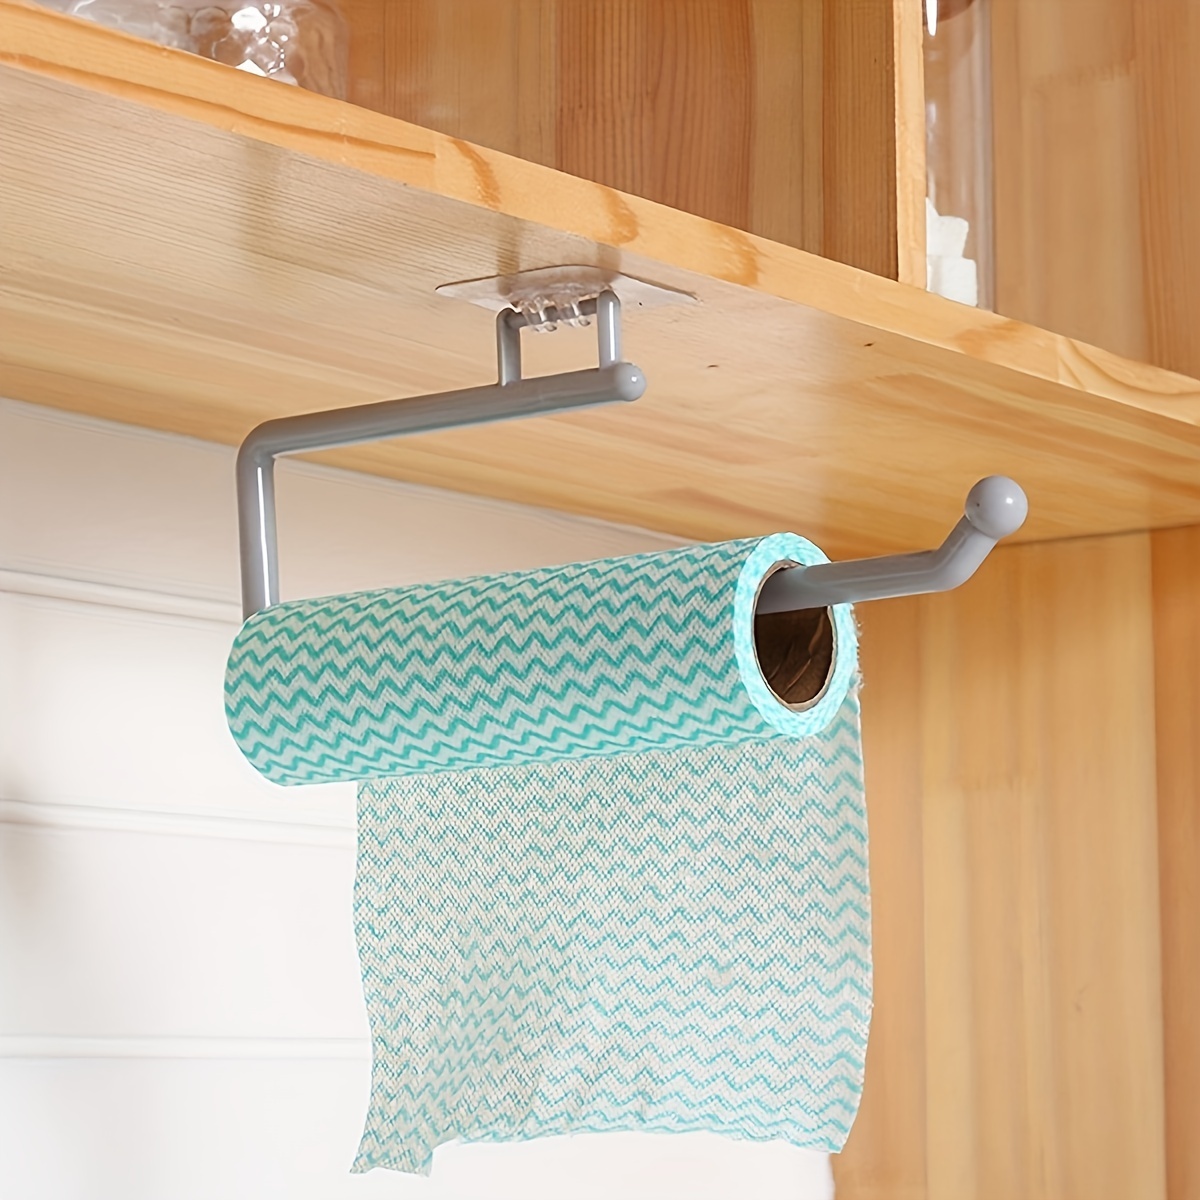 Wall Mounted Paper Towel Roll Holder with Storage Shelves – All About Tidy